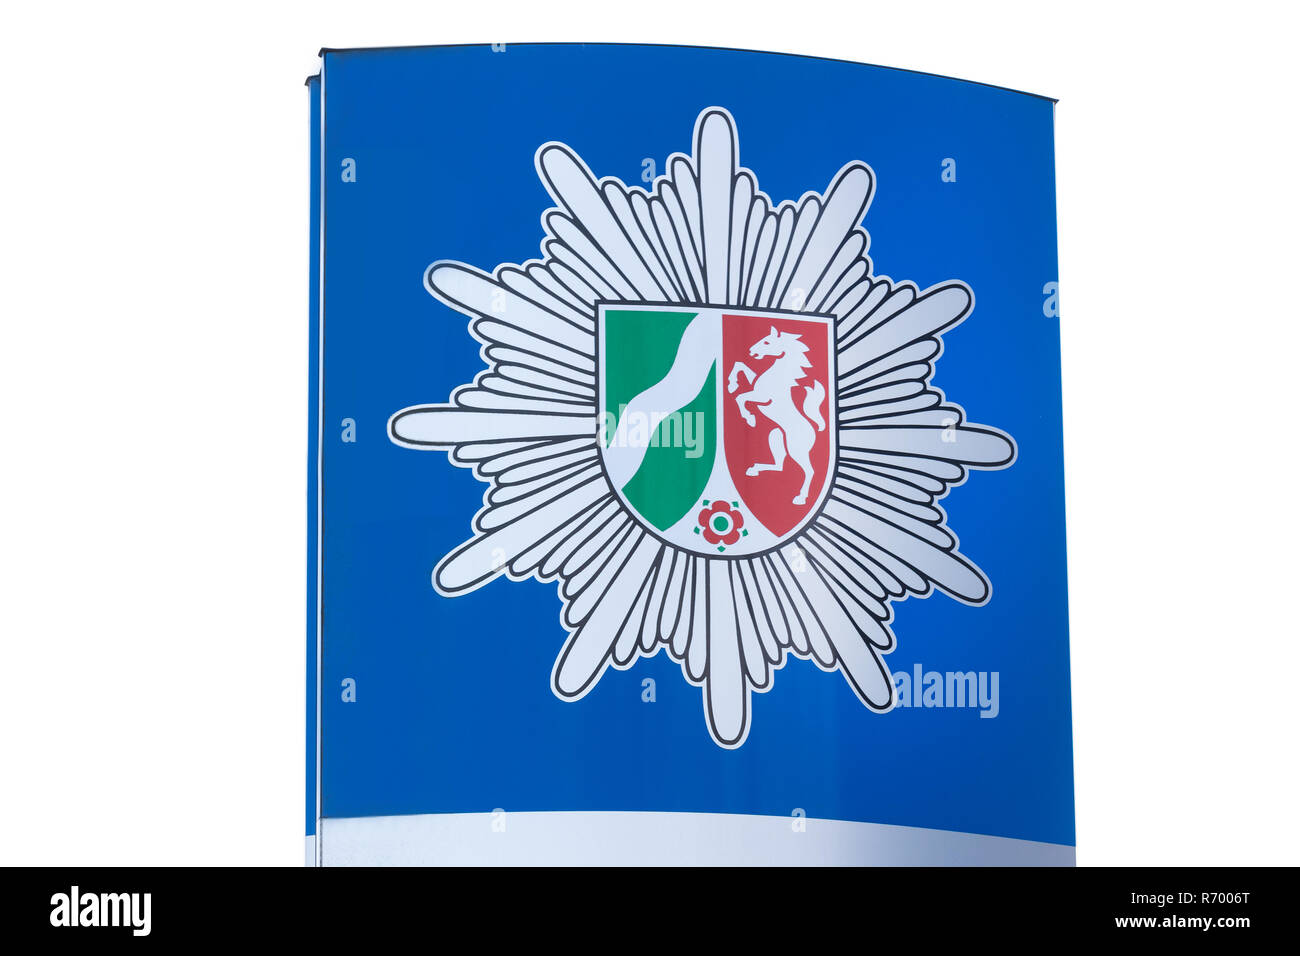 Police Nrw High Resolution Stock Photography and Images - Alamy